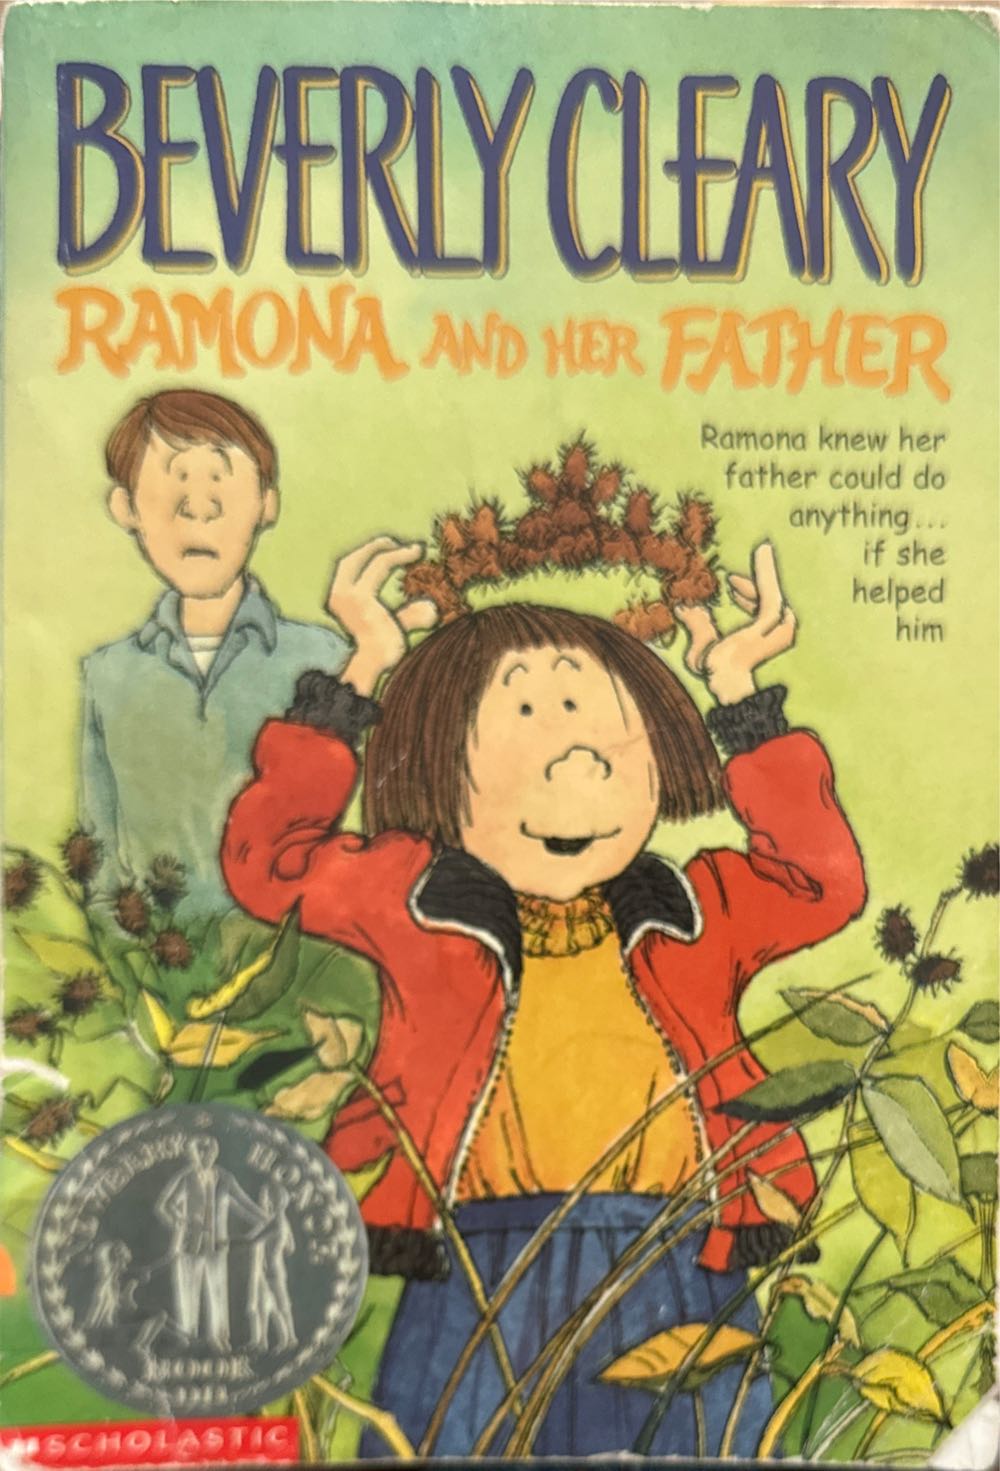 Beverly Cleary Ramona And Her Father - Beverly Cleary (- Paperback) book collectible - Main Image 1